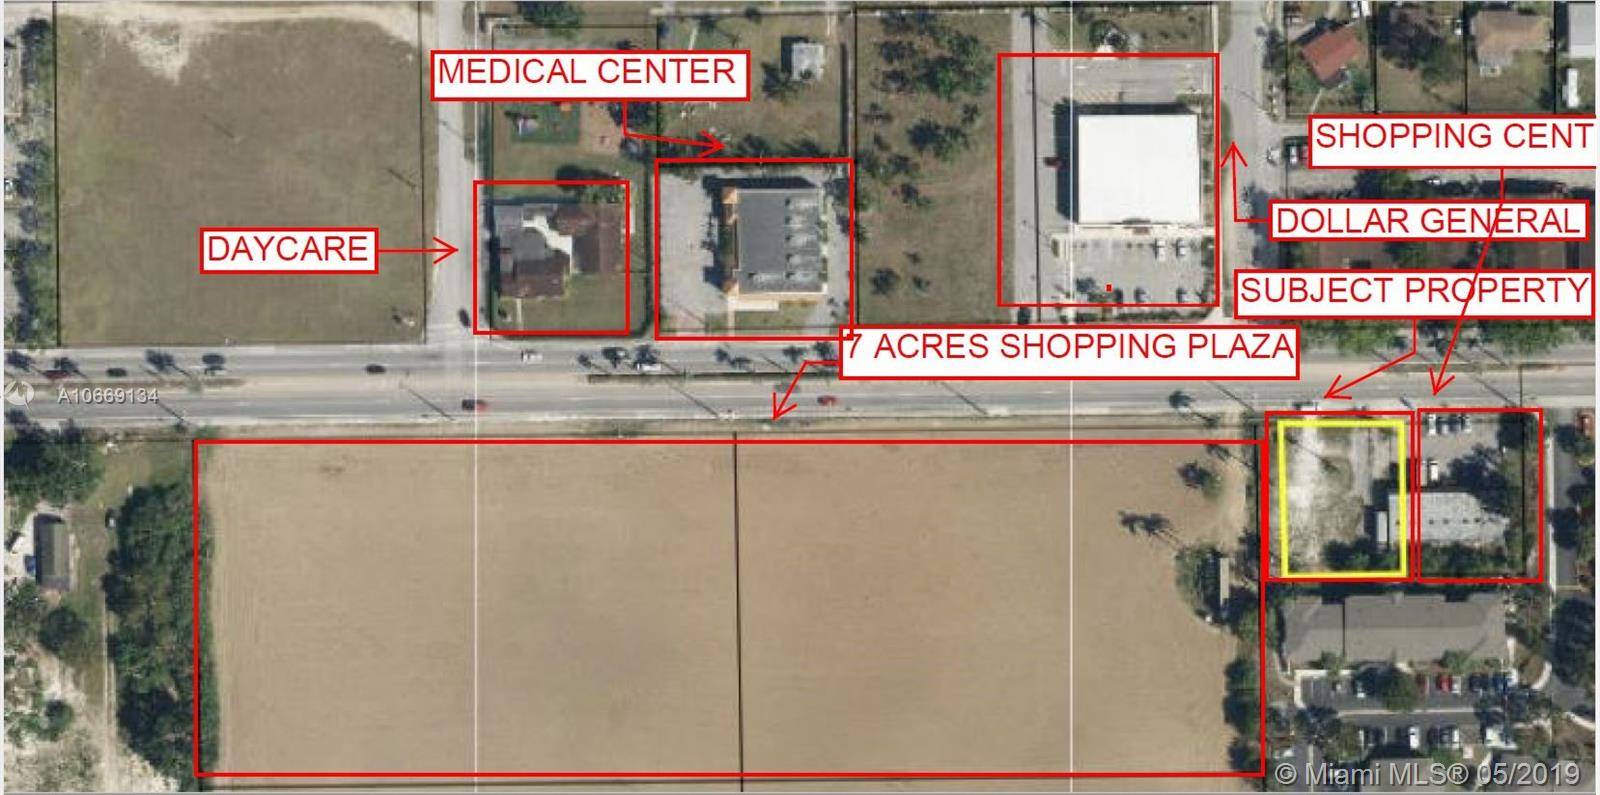 VACANT COMMERCIAL LOT AVAILABLE FOR SALE ON CAMPBEL Drive 100 FEET OF DIRECT FRONTAGE TO 26, 700 CARS DAY ON CAMPBEL.